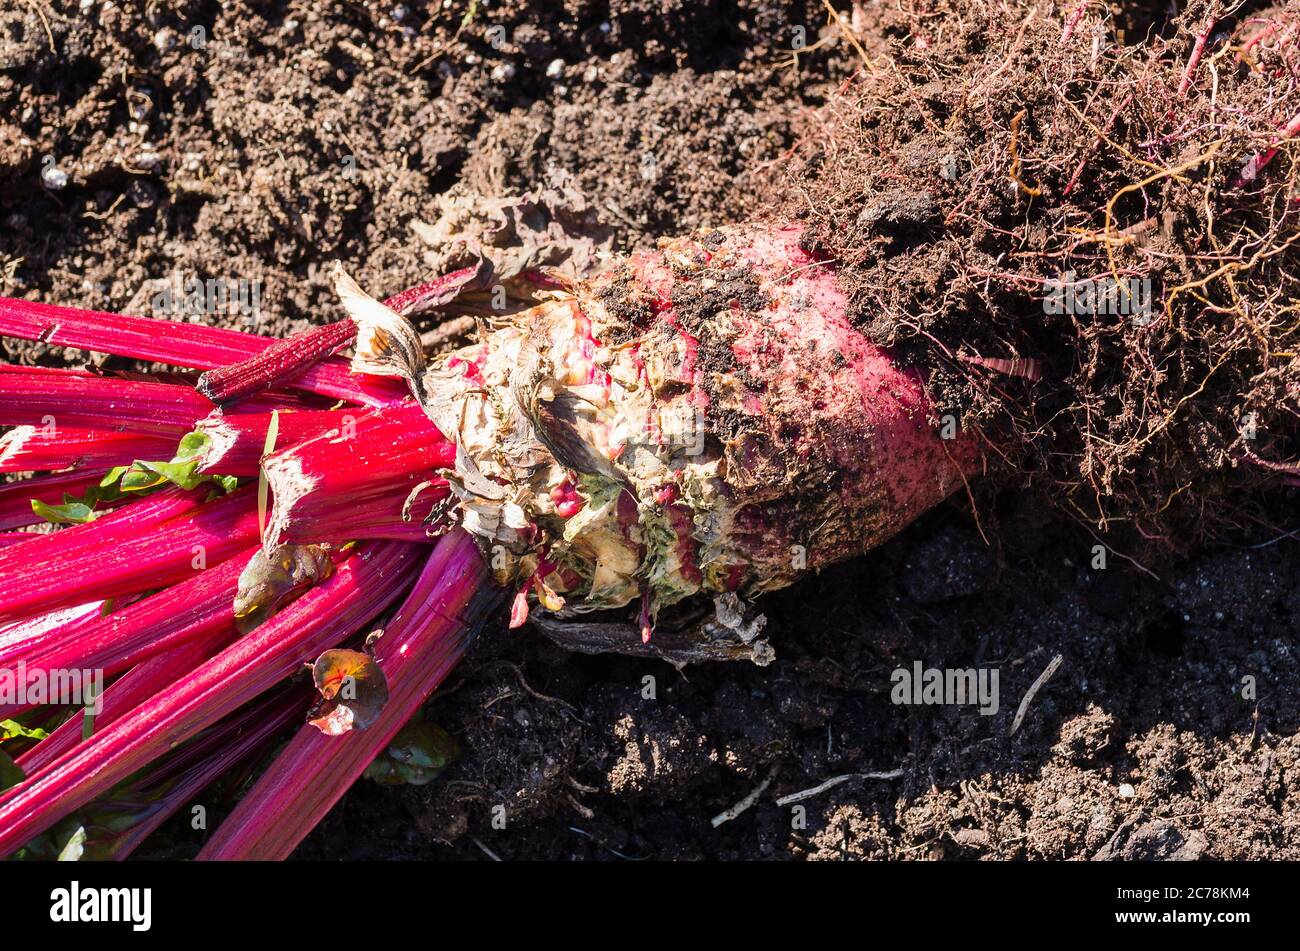 Ruby chard, lifted from the ground at the end of life, showing the bulbous beet-like root, characteristic of this range of vegetable. It produced tast Stock Photo